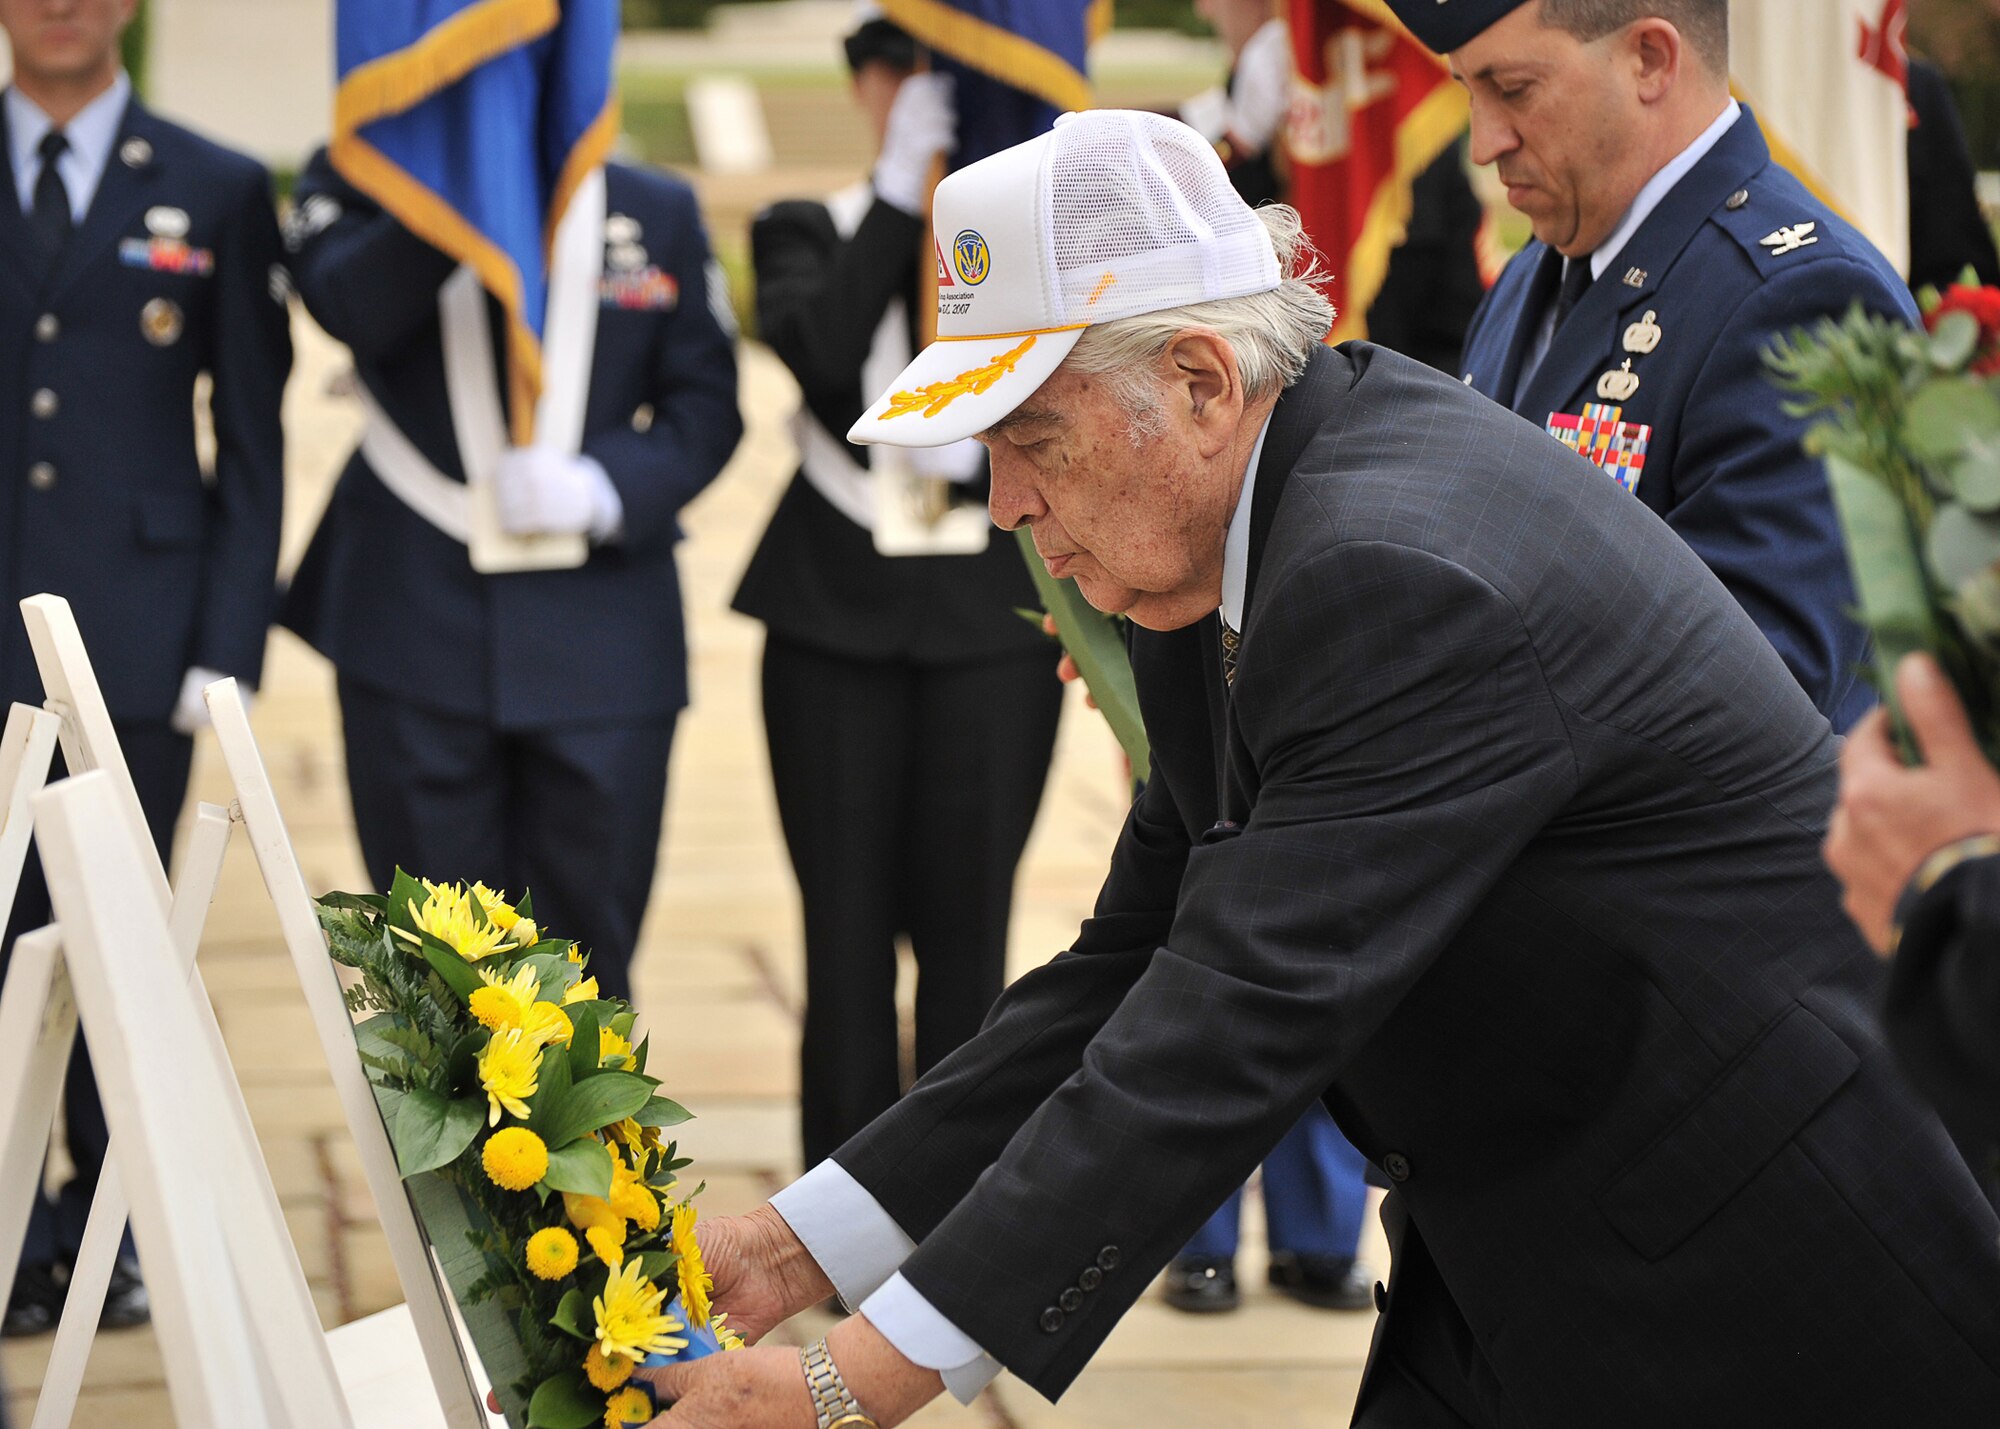 Former 360th Bomb Squadron Radioman Eddie Deerfield lays a wreath on behalf of the 303rd Bomb Group (Heavy) during a May 13th ceremony at Cambridge American Cemetery in England as part of HELL’S ANGELS DAY celebrating the 68th anniversary of the completion of 25 missions by that B-17F.  (U.S. Air Force photo by Staff Sgt. Javier Cruz)